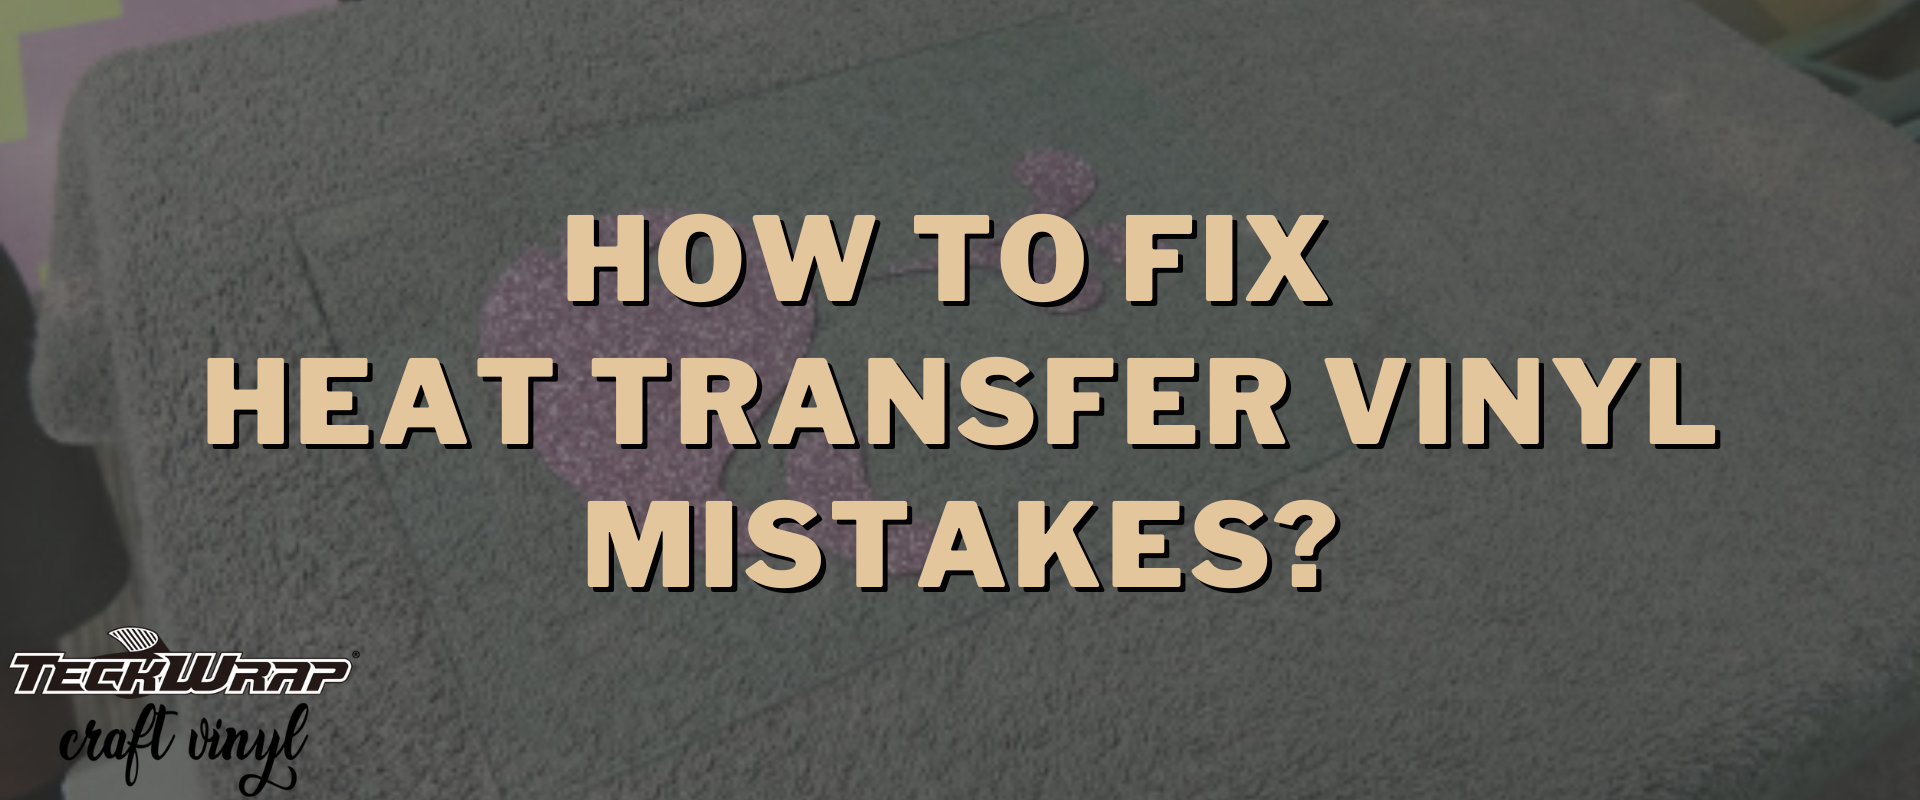 3 Ways to Fix HTV Mistakes - Siser North America